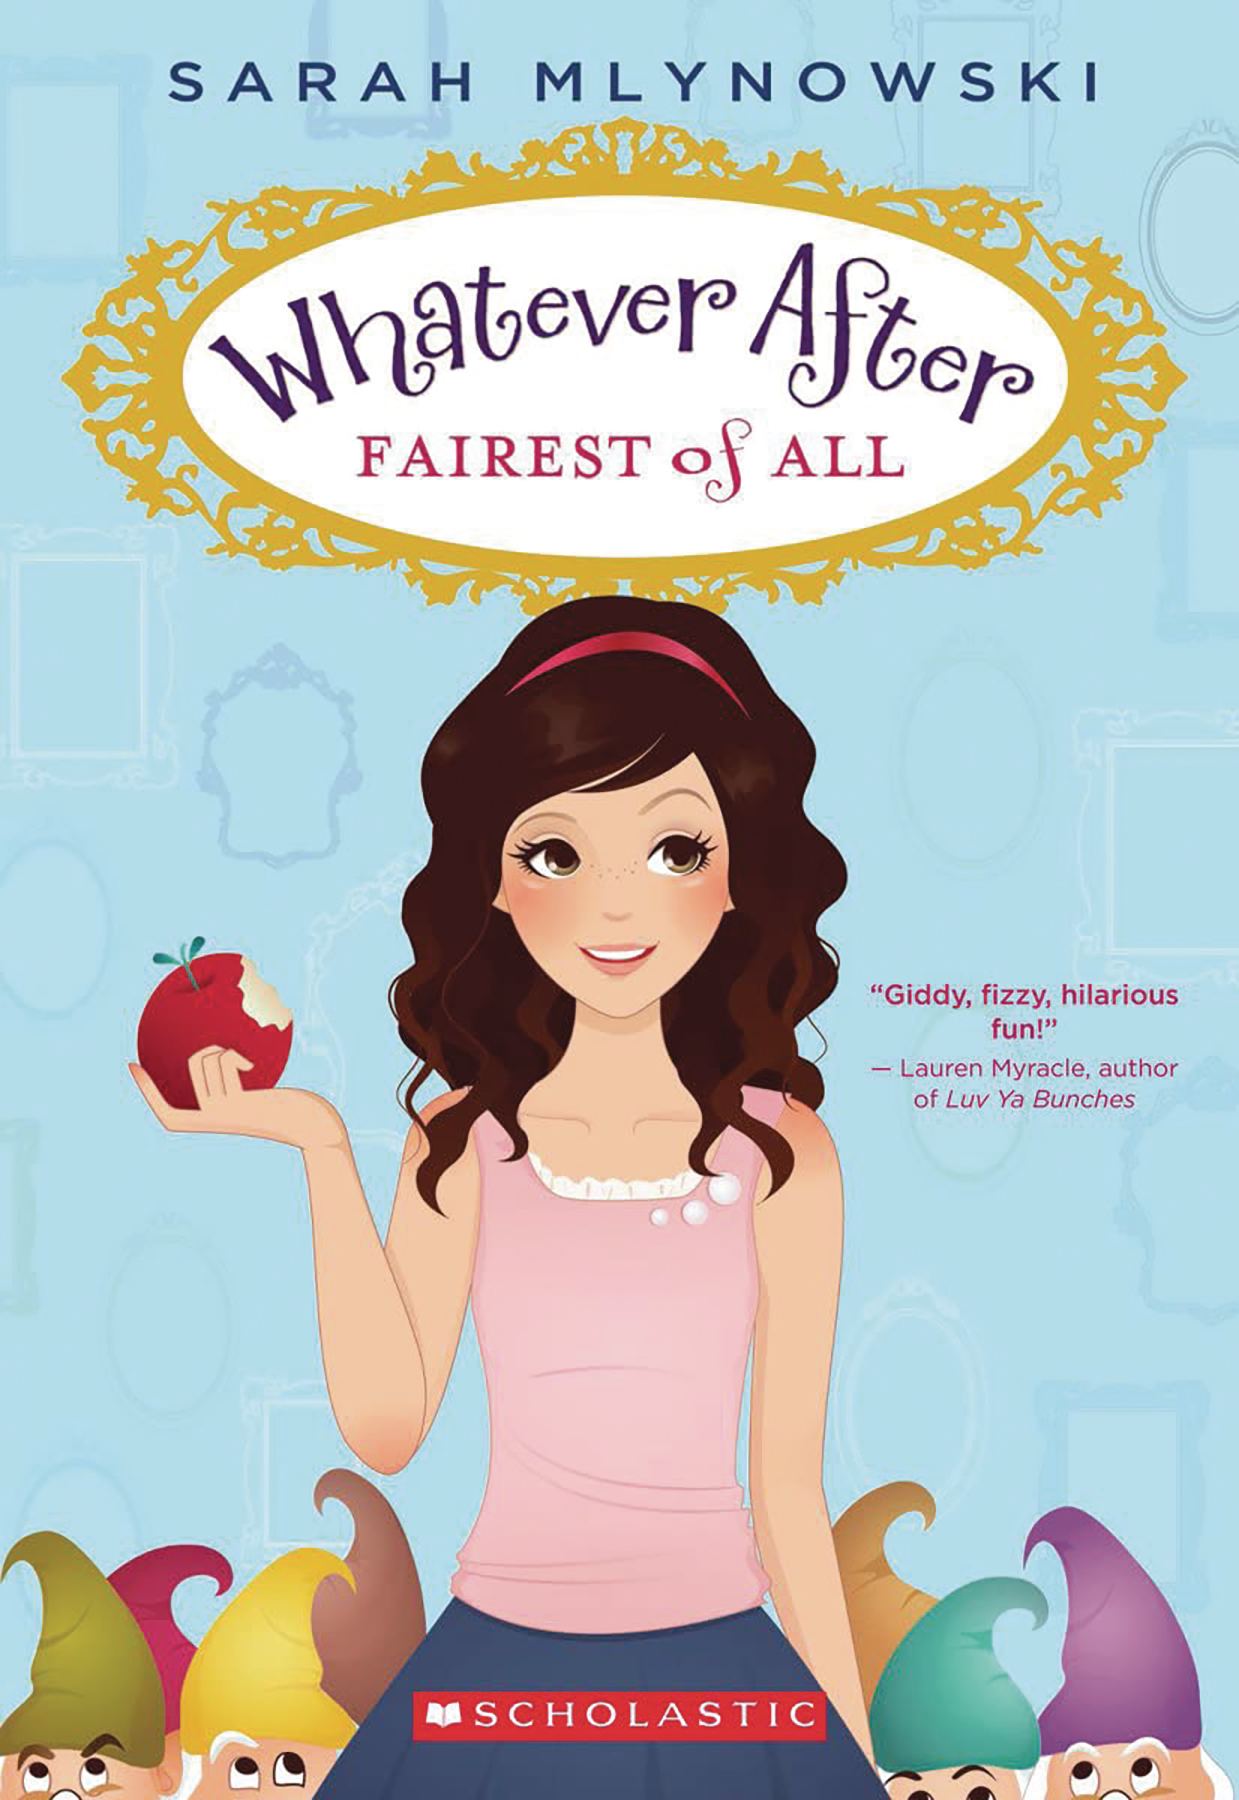 Whatever After Graphic Novel Volume 1 Fairest of All